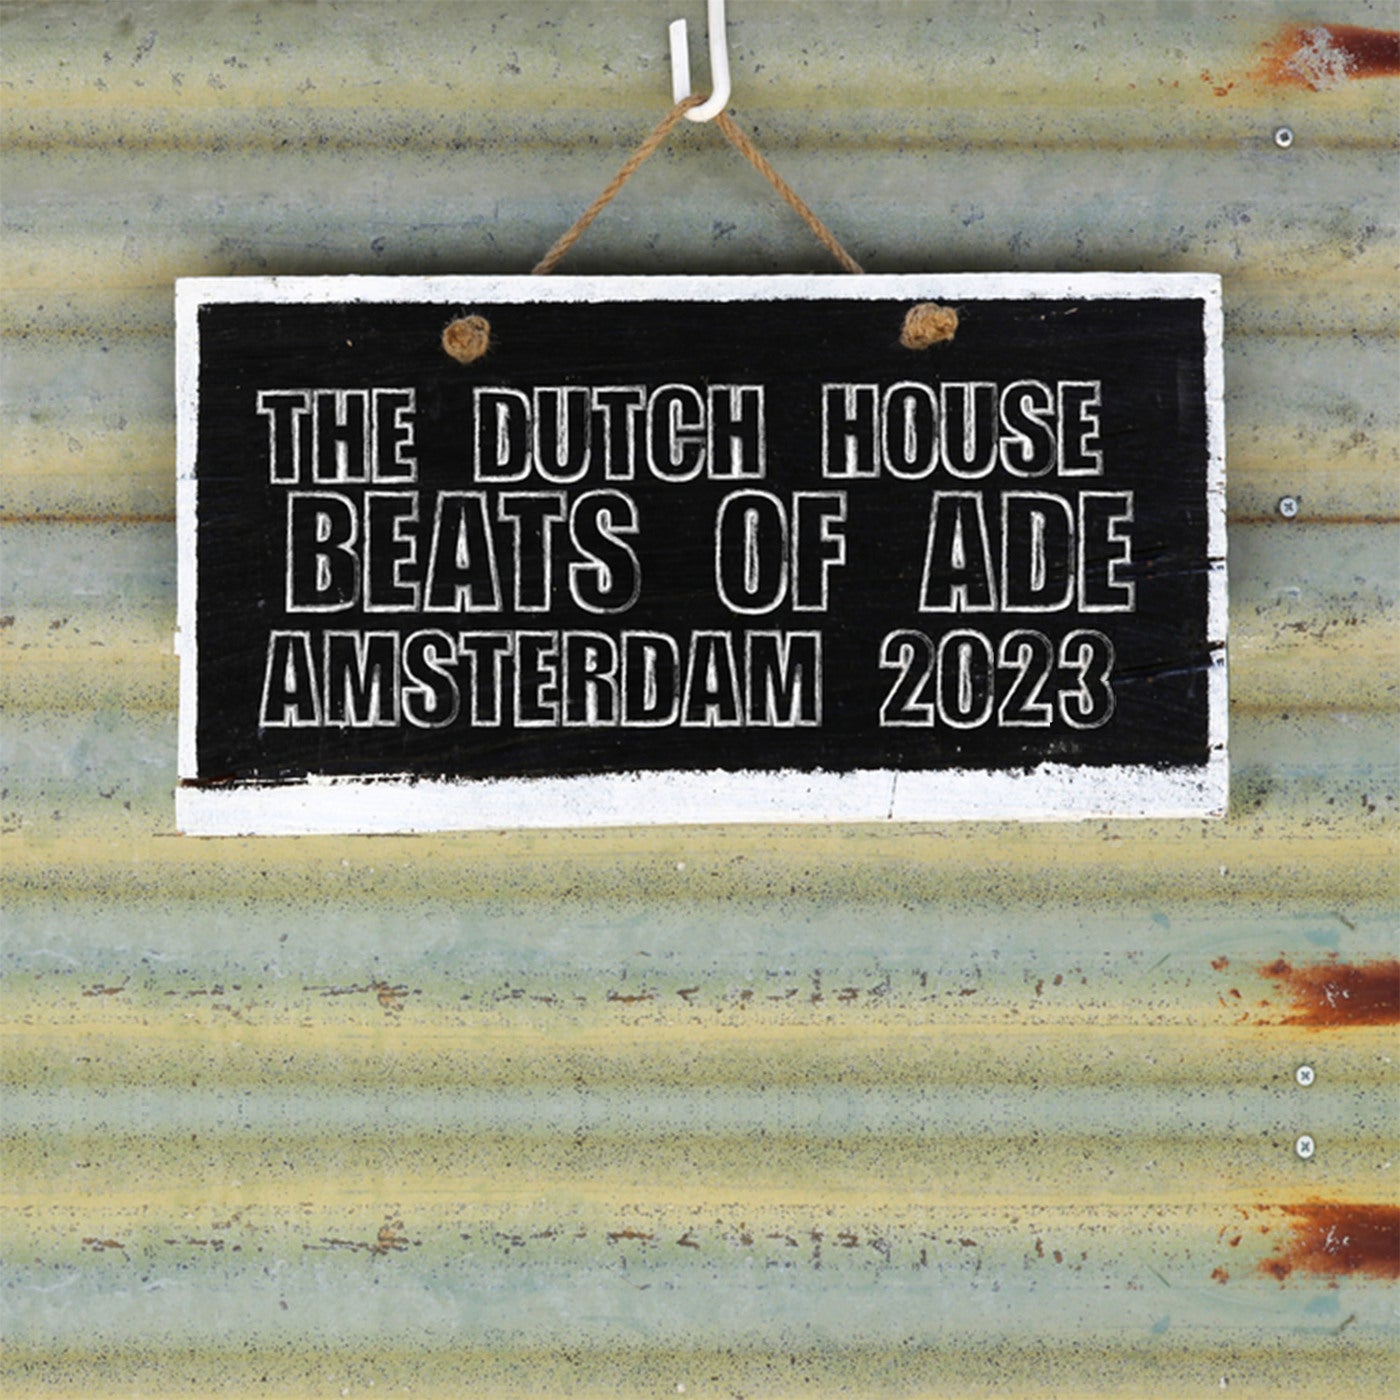 The Dutch House Beats of ADE: Amsterdam 2023